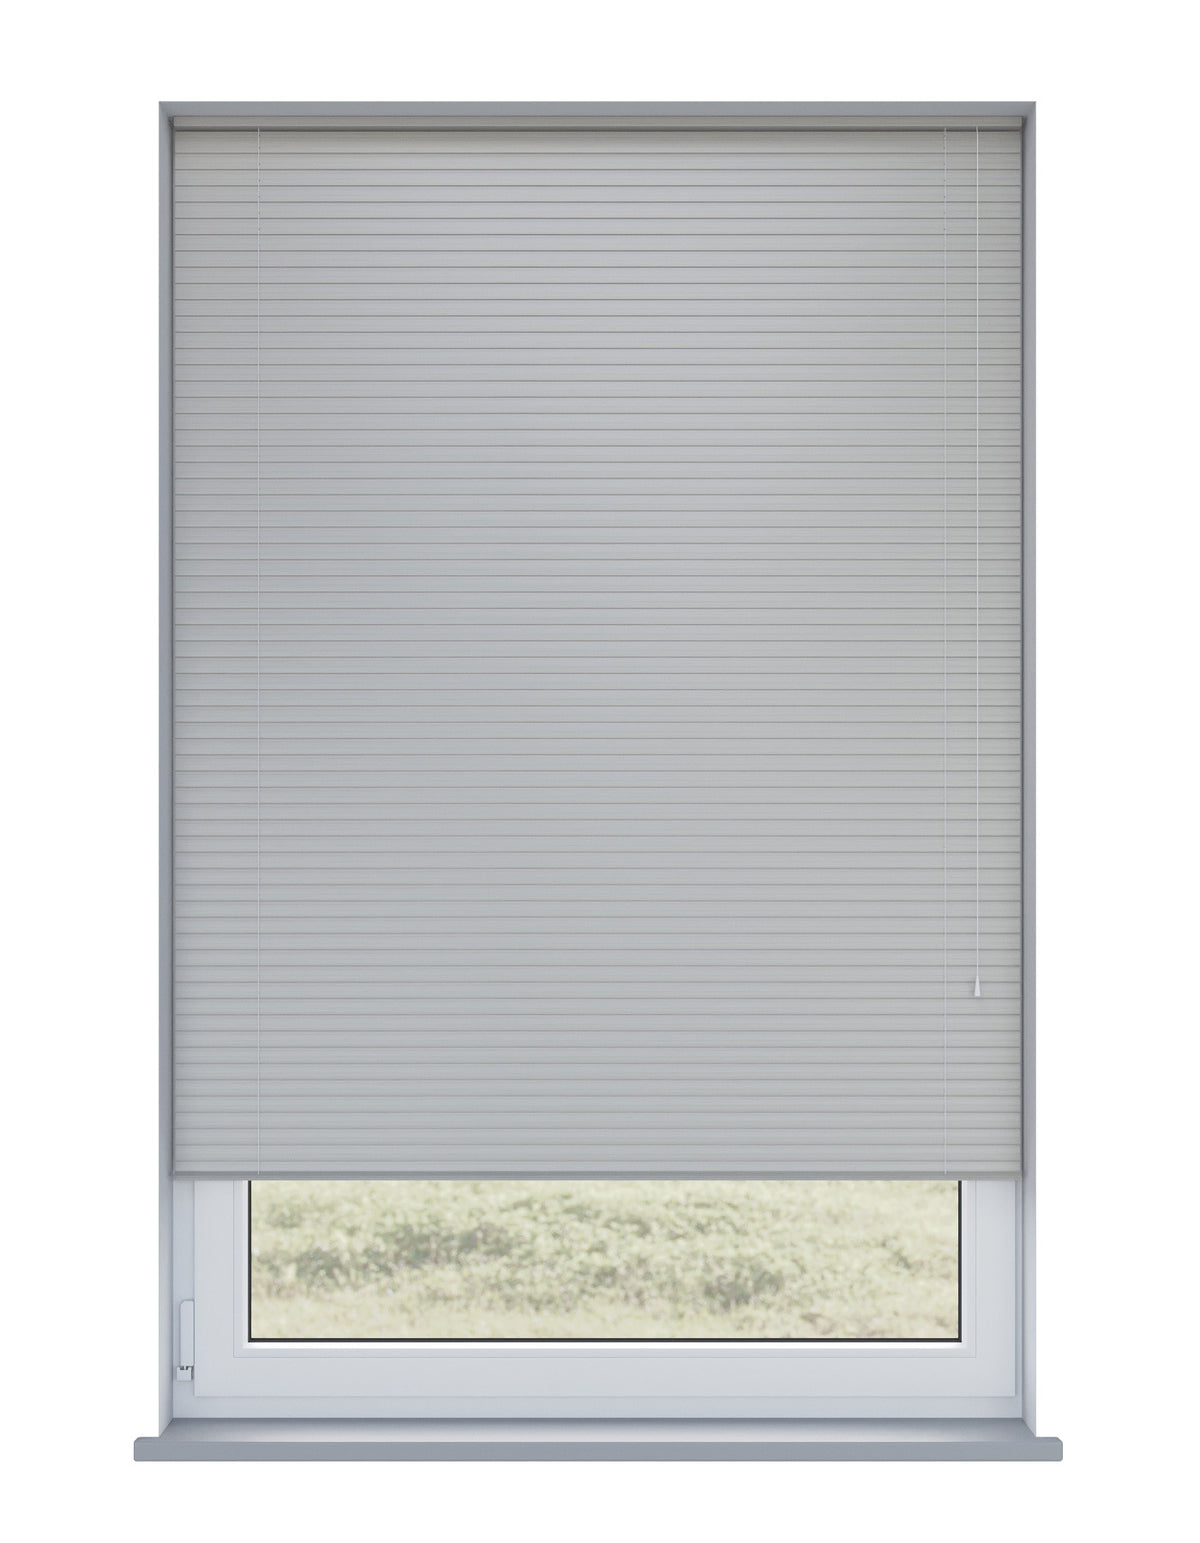 Expressions Harbour Grey Wooden Blind